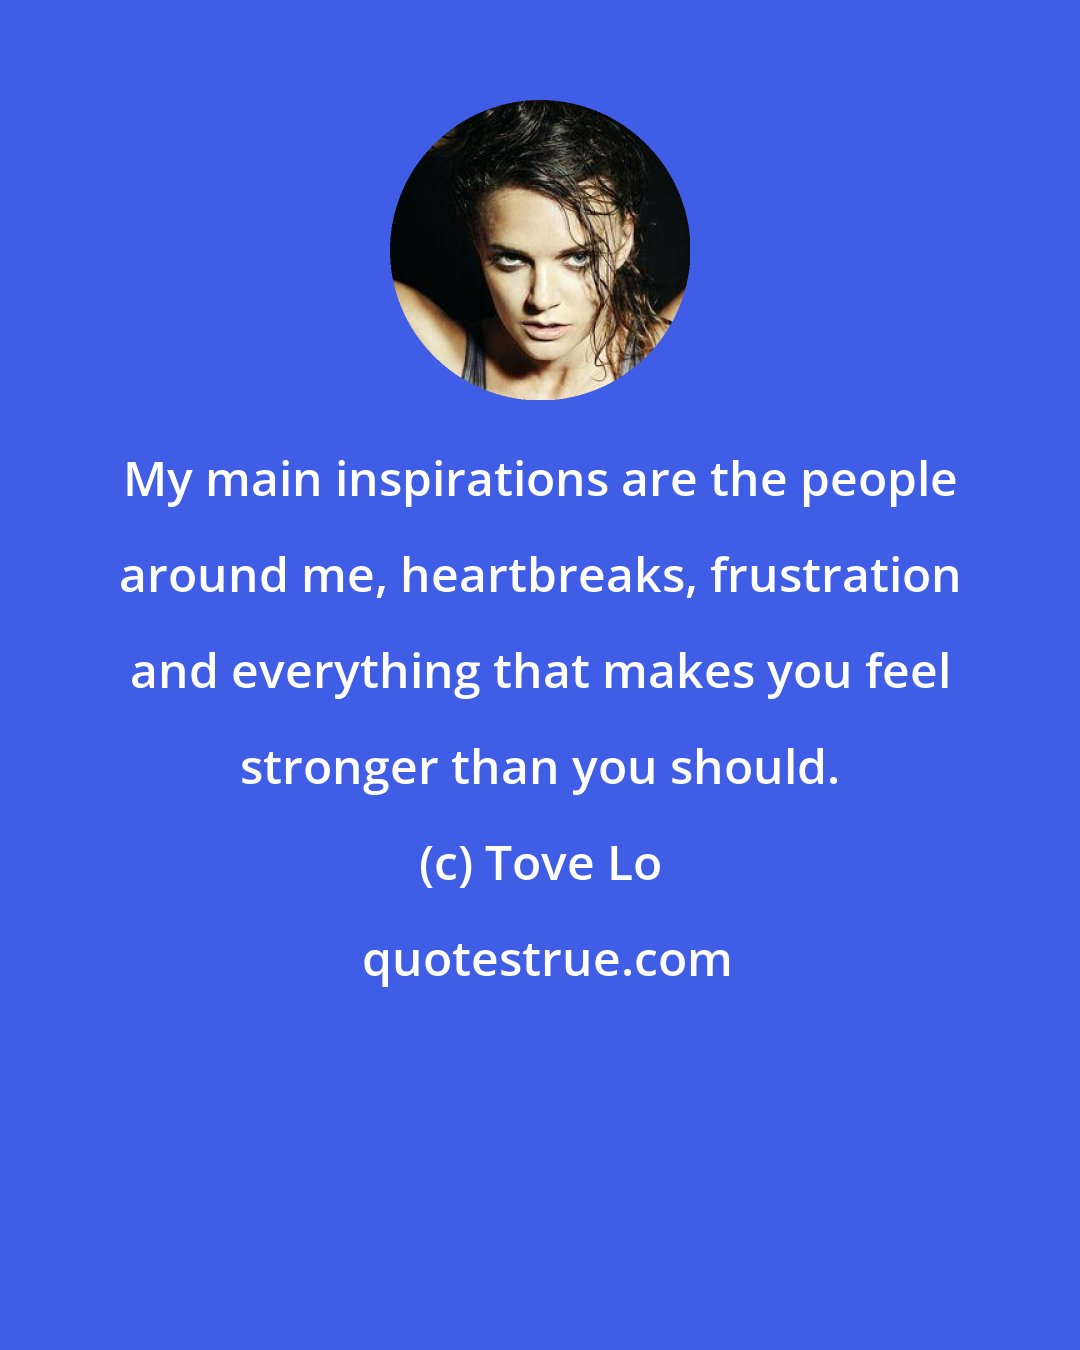 Tove Lo: My main inspirations are the people around me, heartbreaks, frustration and everything that makes you feel stronger than you should.